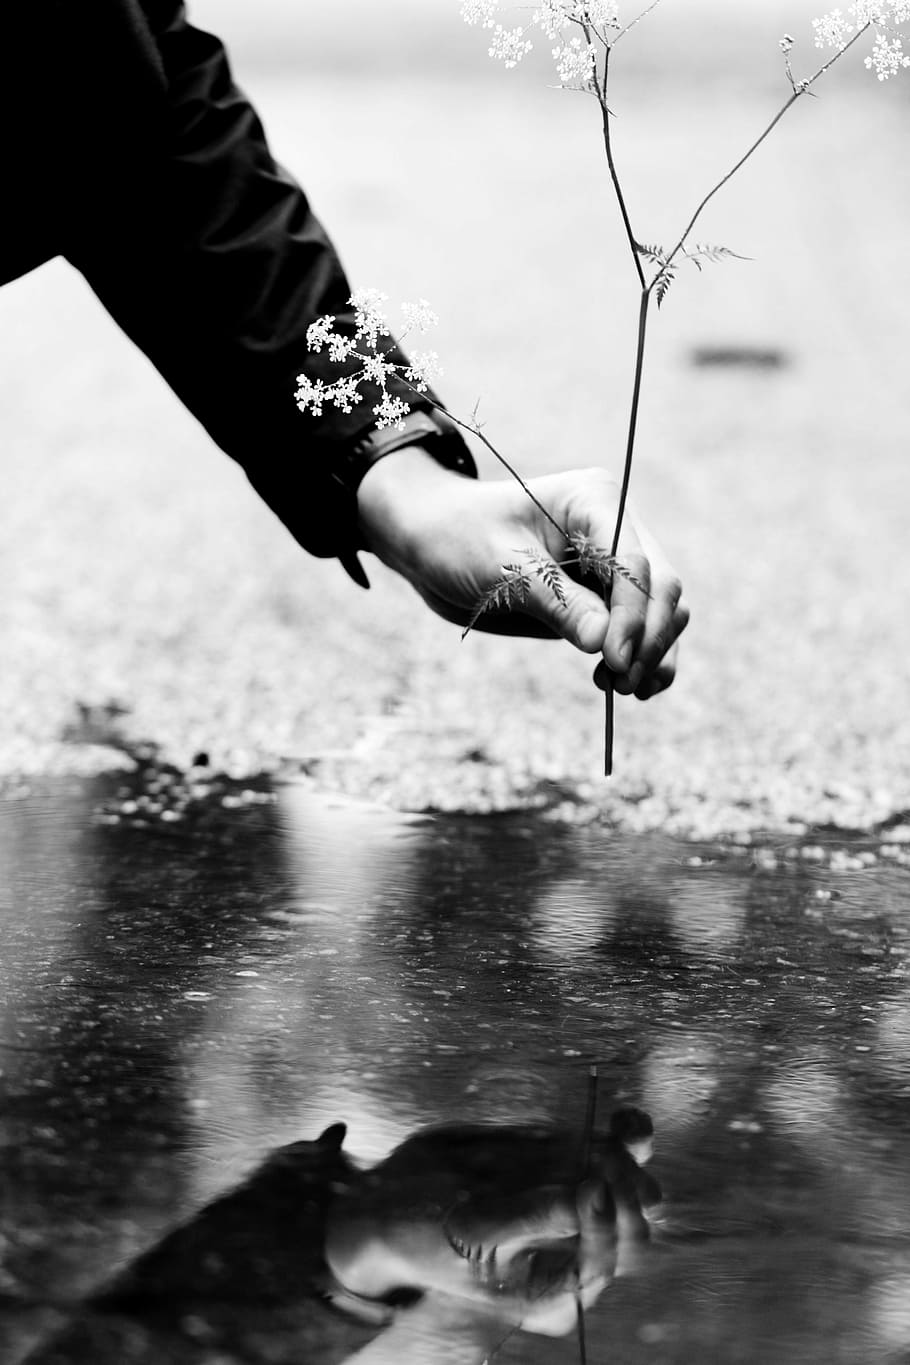 flower, hand, contrast, water, mud puddle, reflection, nature, human Hand, black And White, outdoors